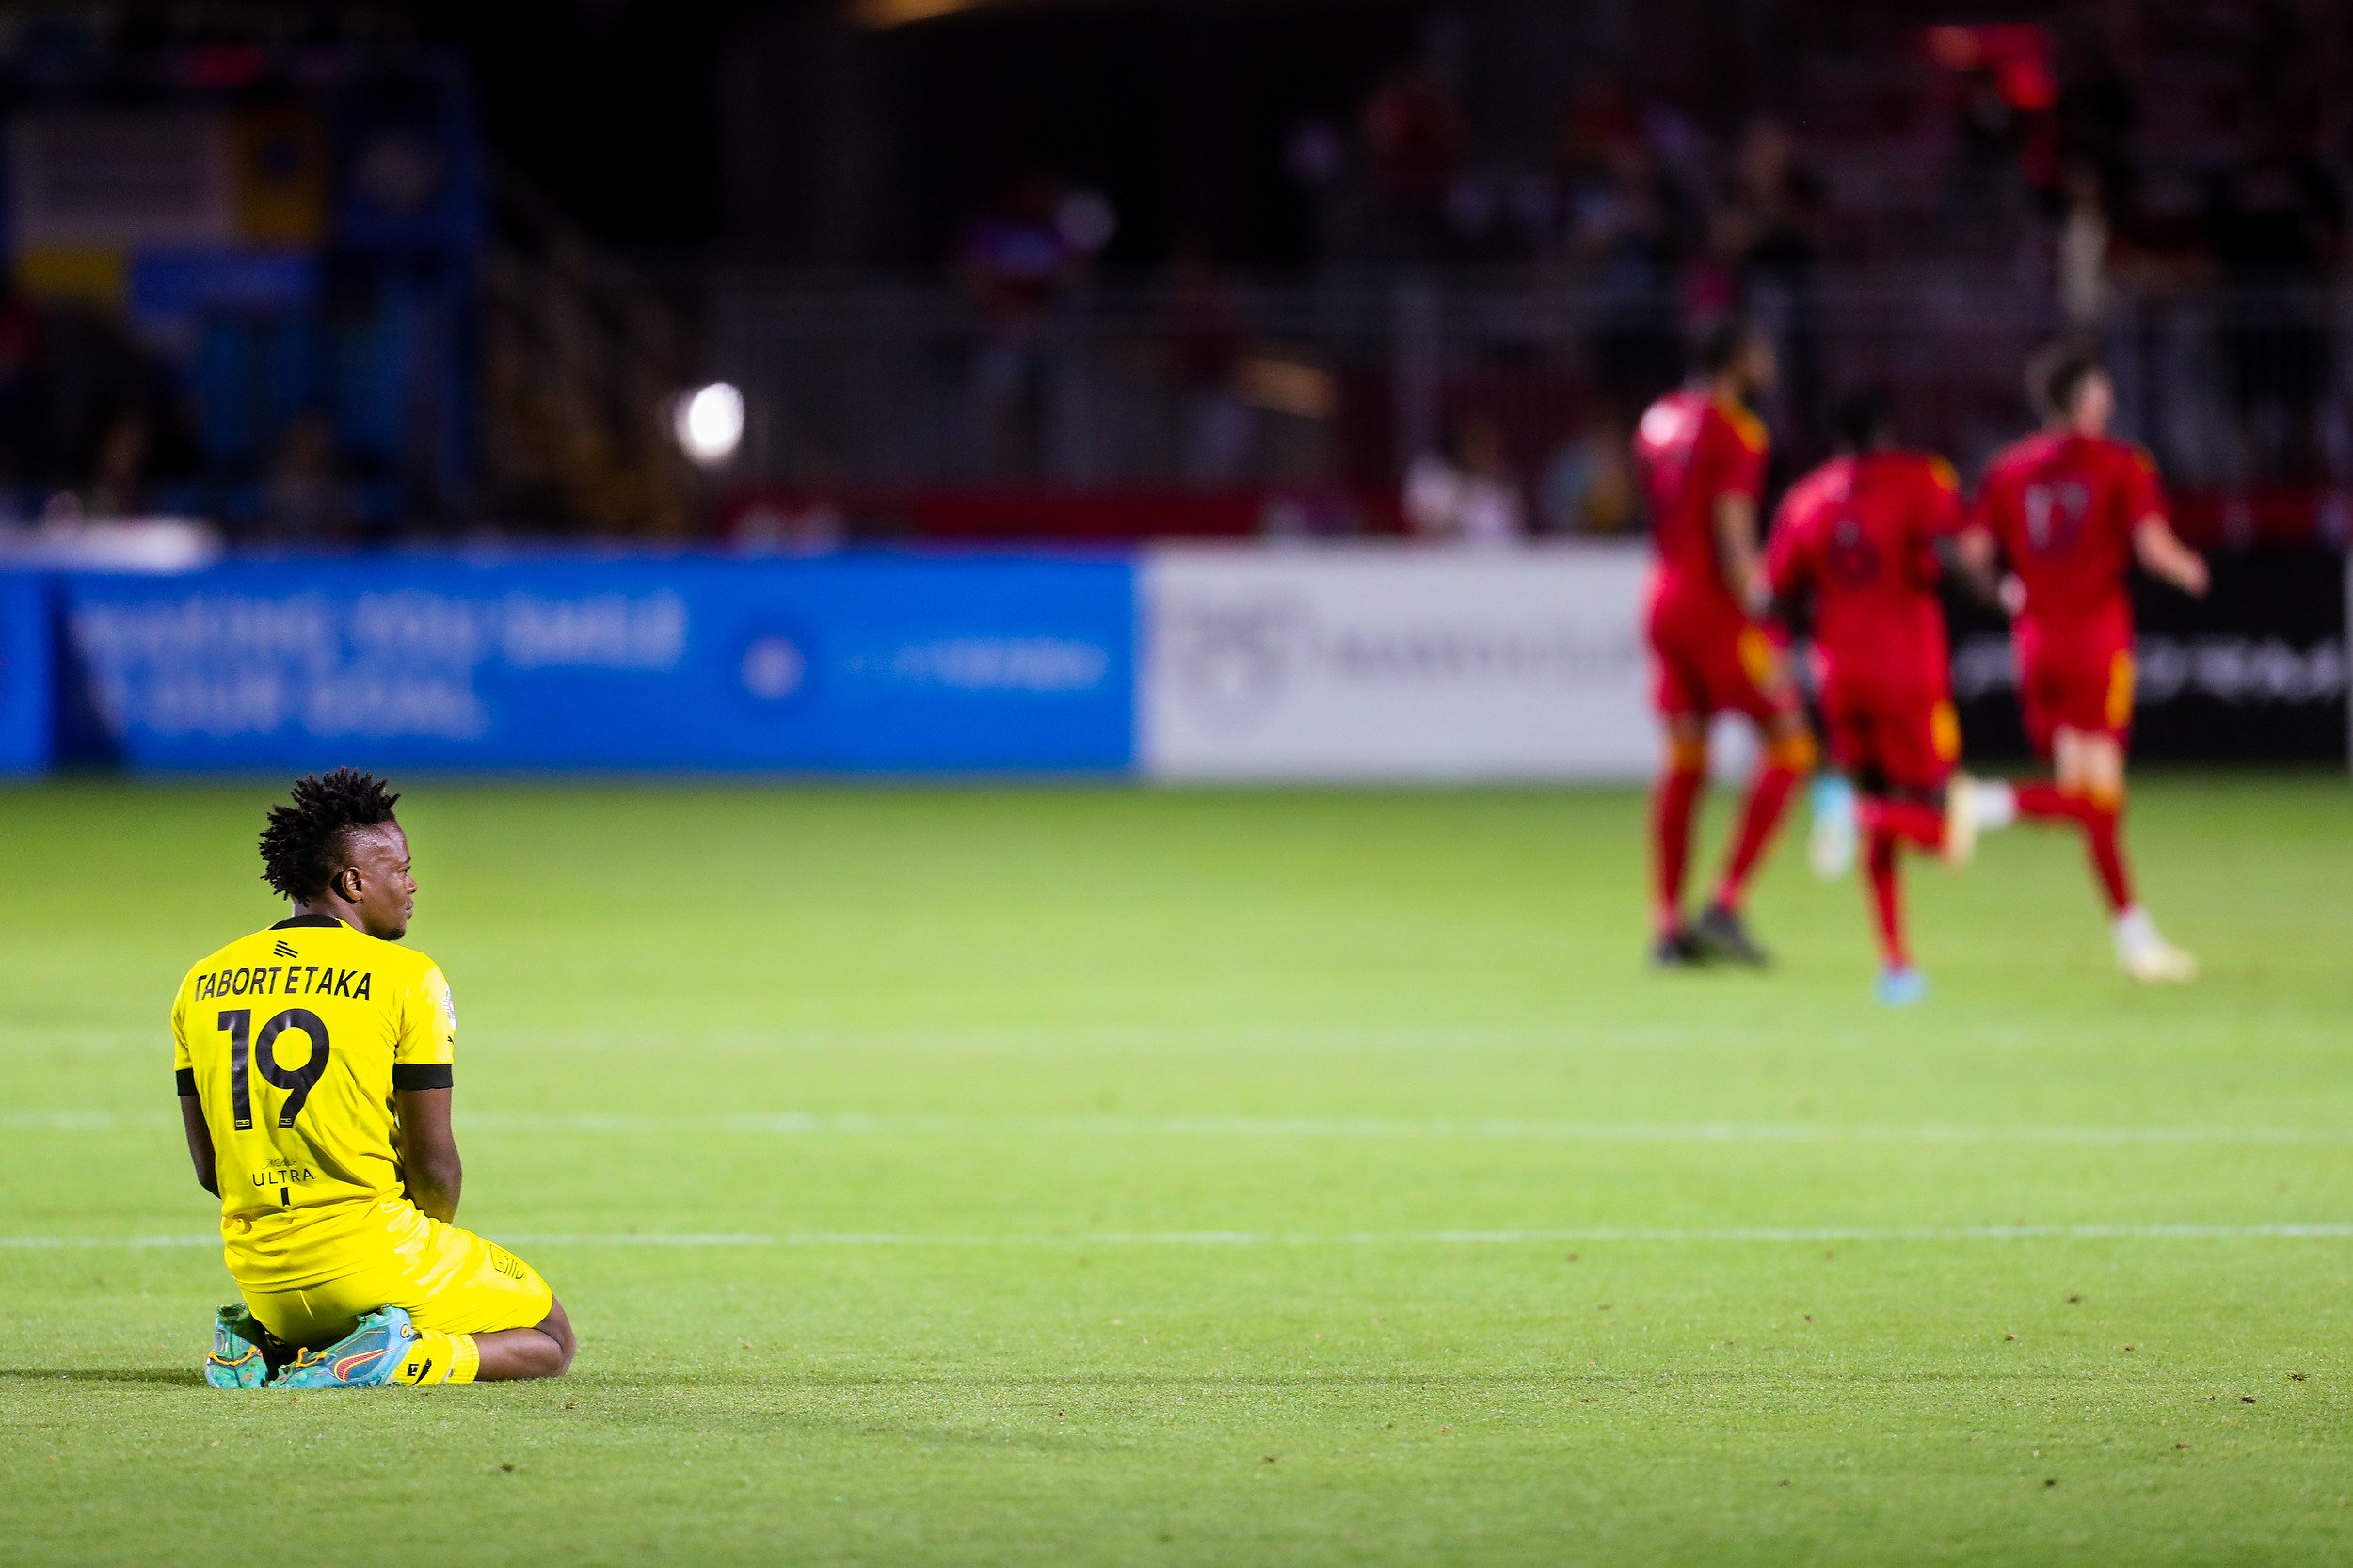  United forward Preston Etaka (19), left, sits disappointed after losing the match against Phoenix Rising FC on Saturday, April 16, 2022, in Chandler. Rising beat the United 1-0 after a fist half goal and a late penalty kick stop by Phoenix Rising FC